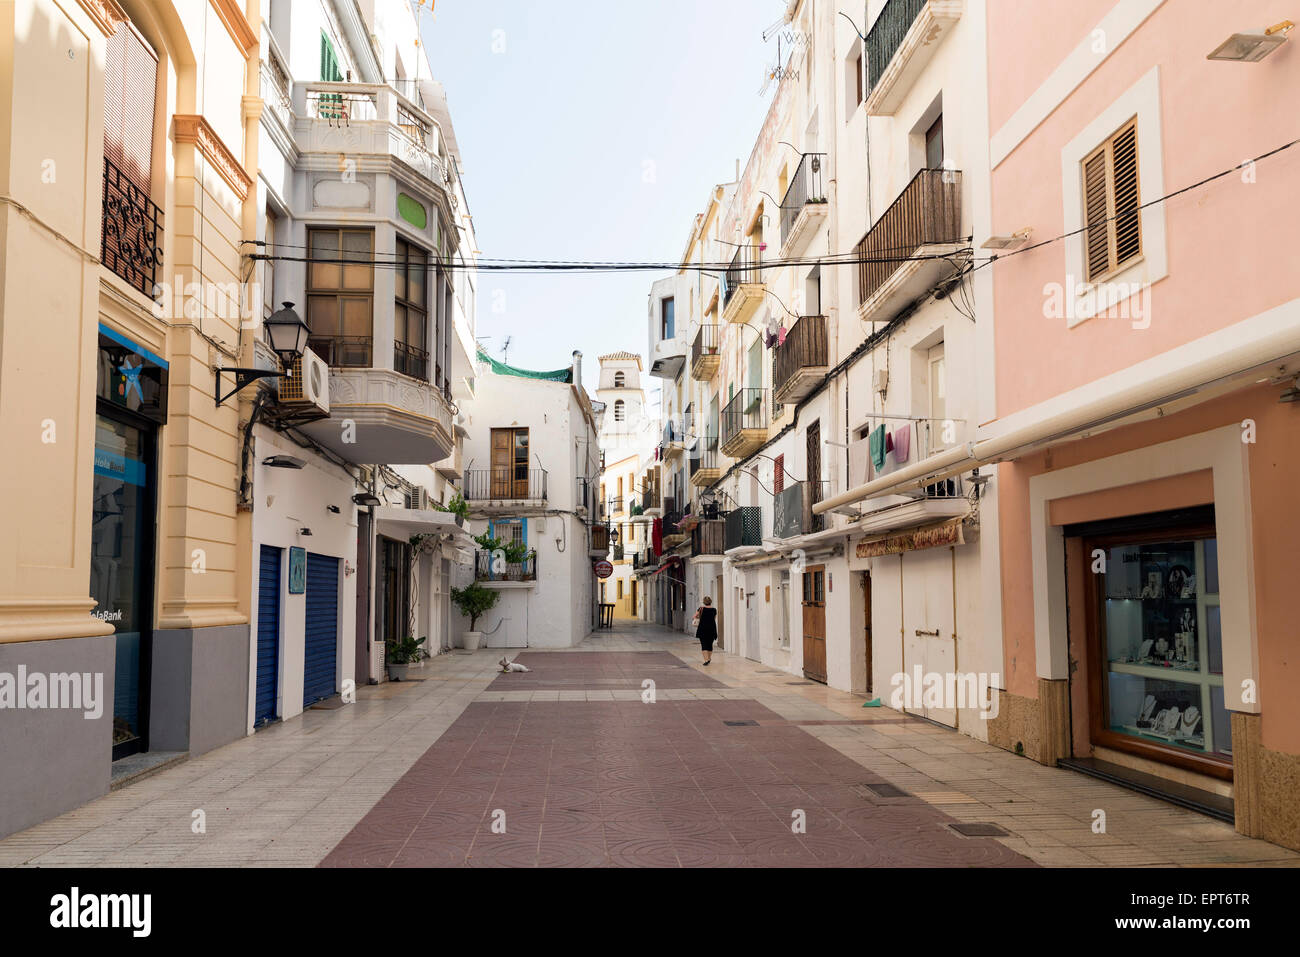 IBIZA, SPAIN - MAY 13, 2015: Ibiza Old Town. A picturesque street of the old town of Ibiza, with its whitewashed houses and balc Stock Photo